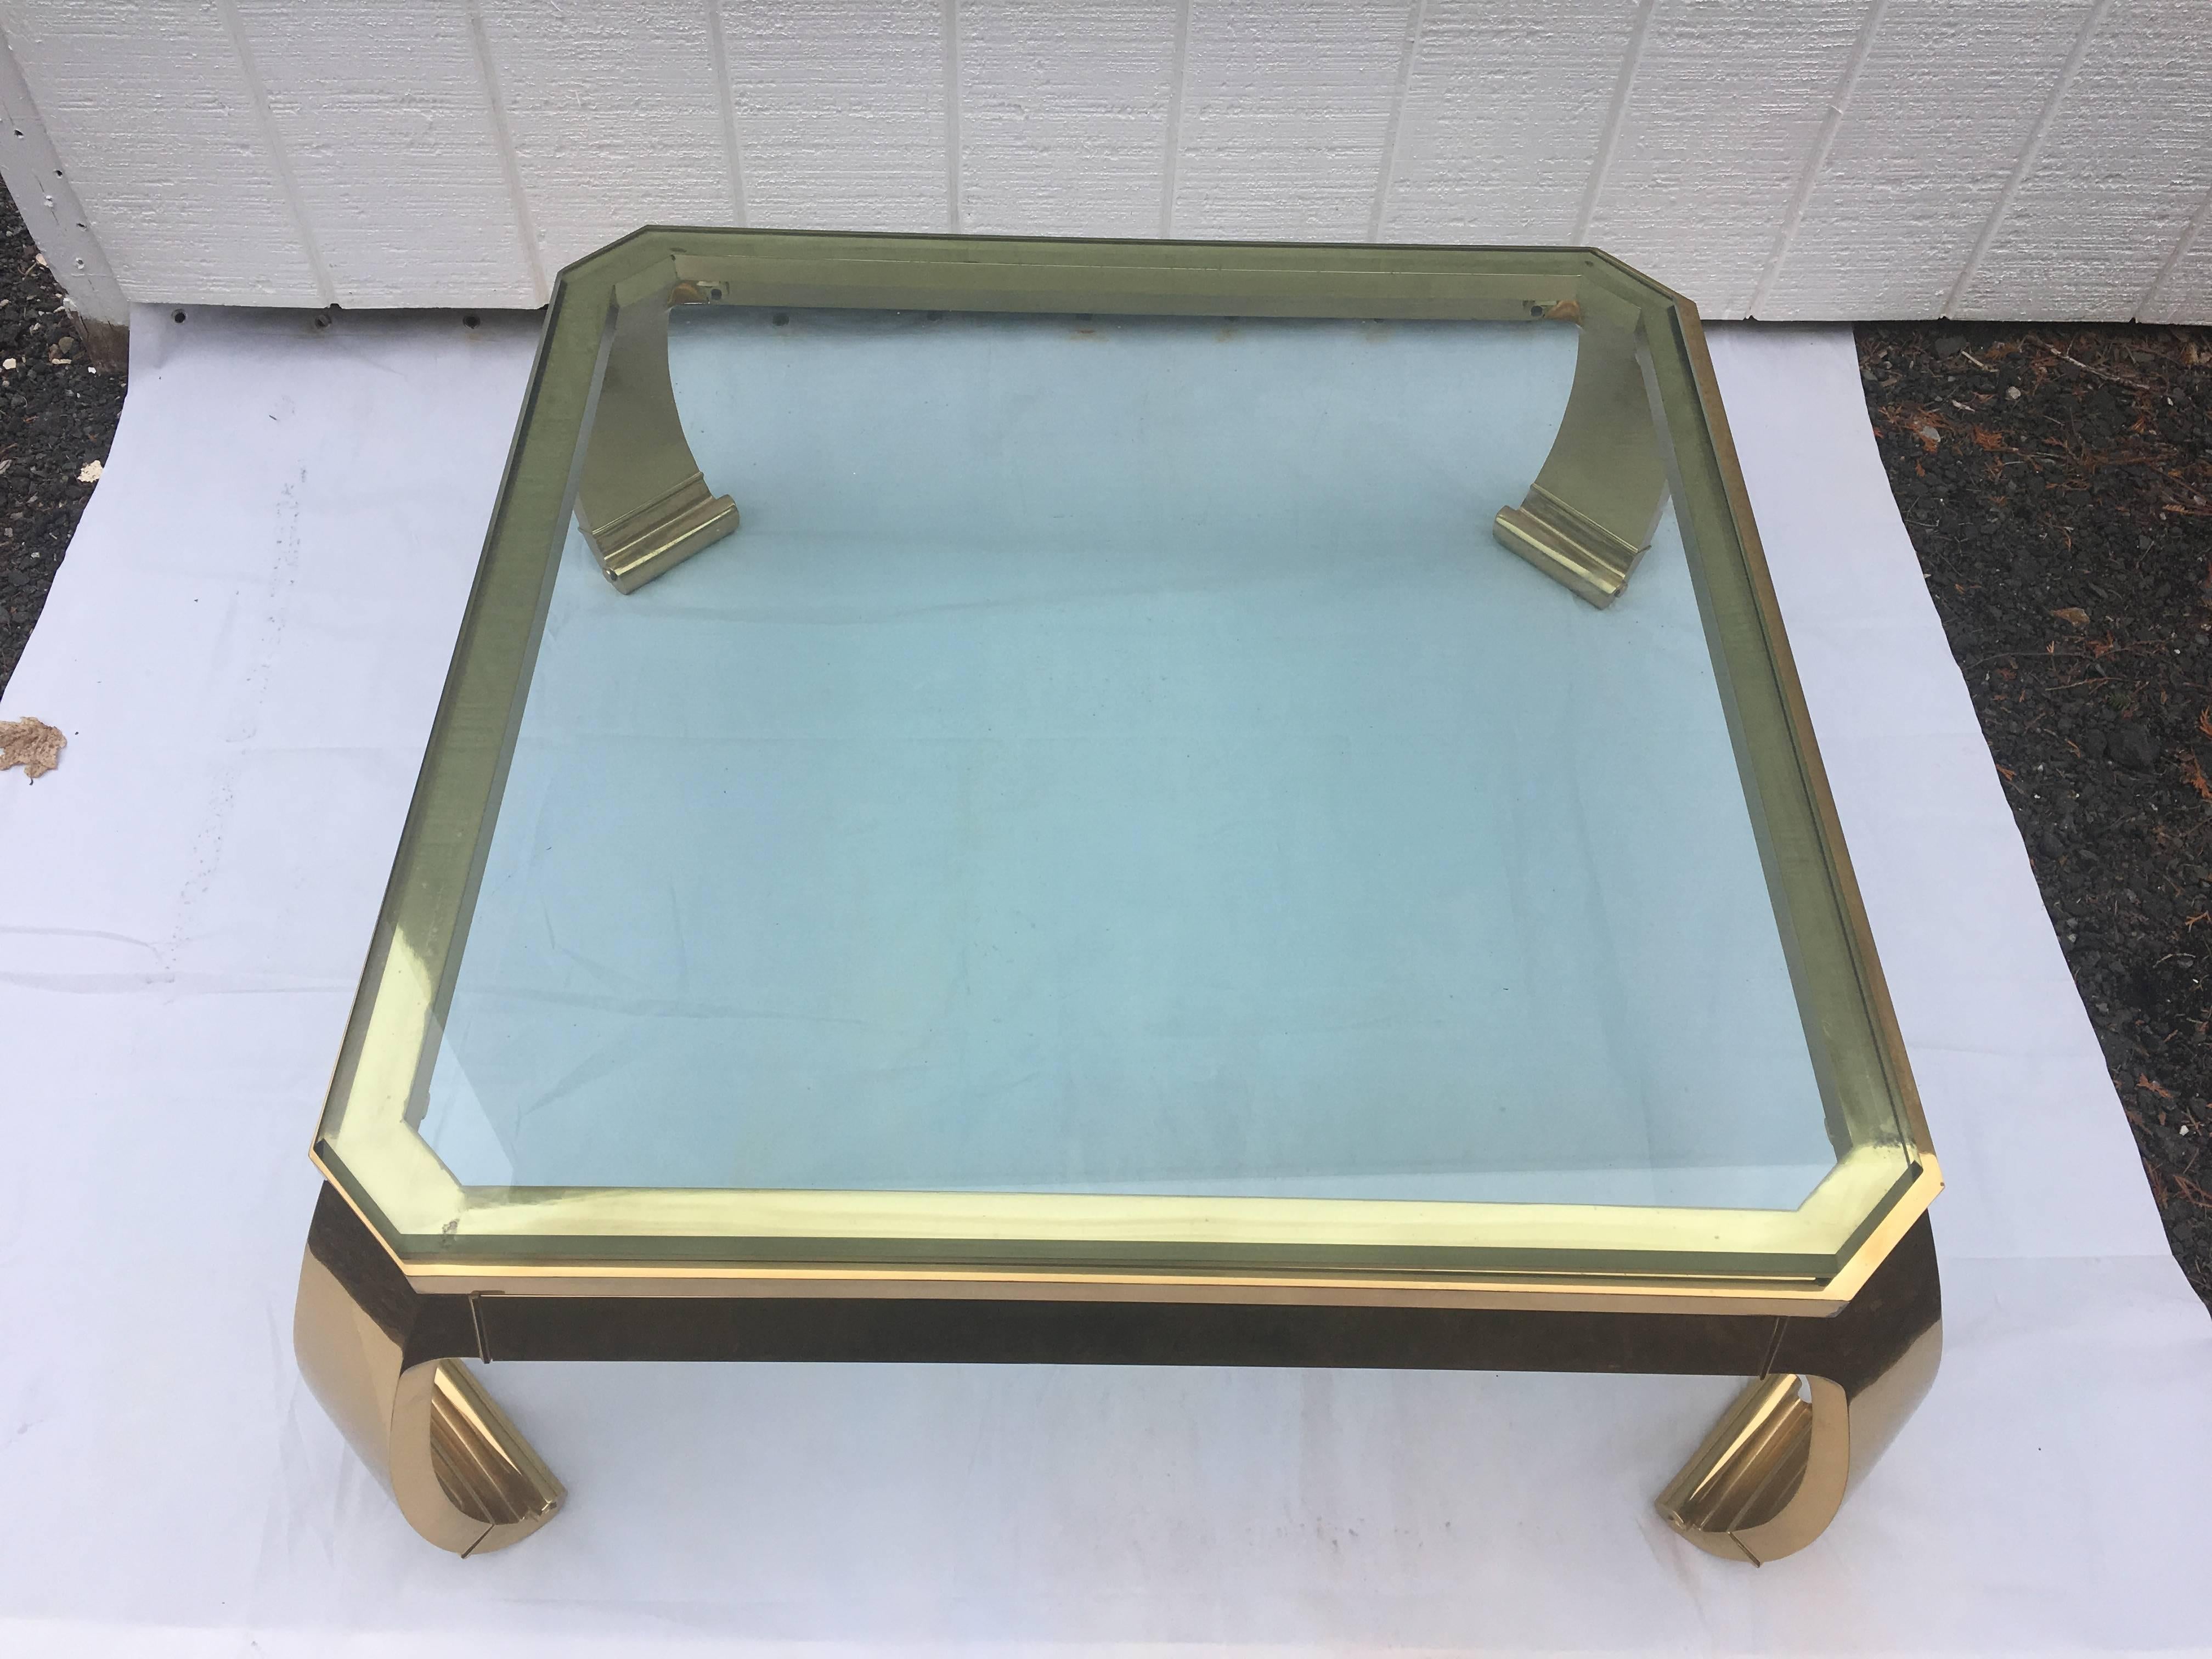  Asian Inspired Brass and Glass Coffee Table attributed to Mastercraft 3